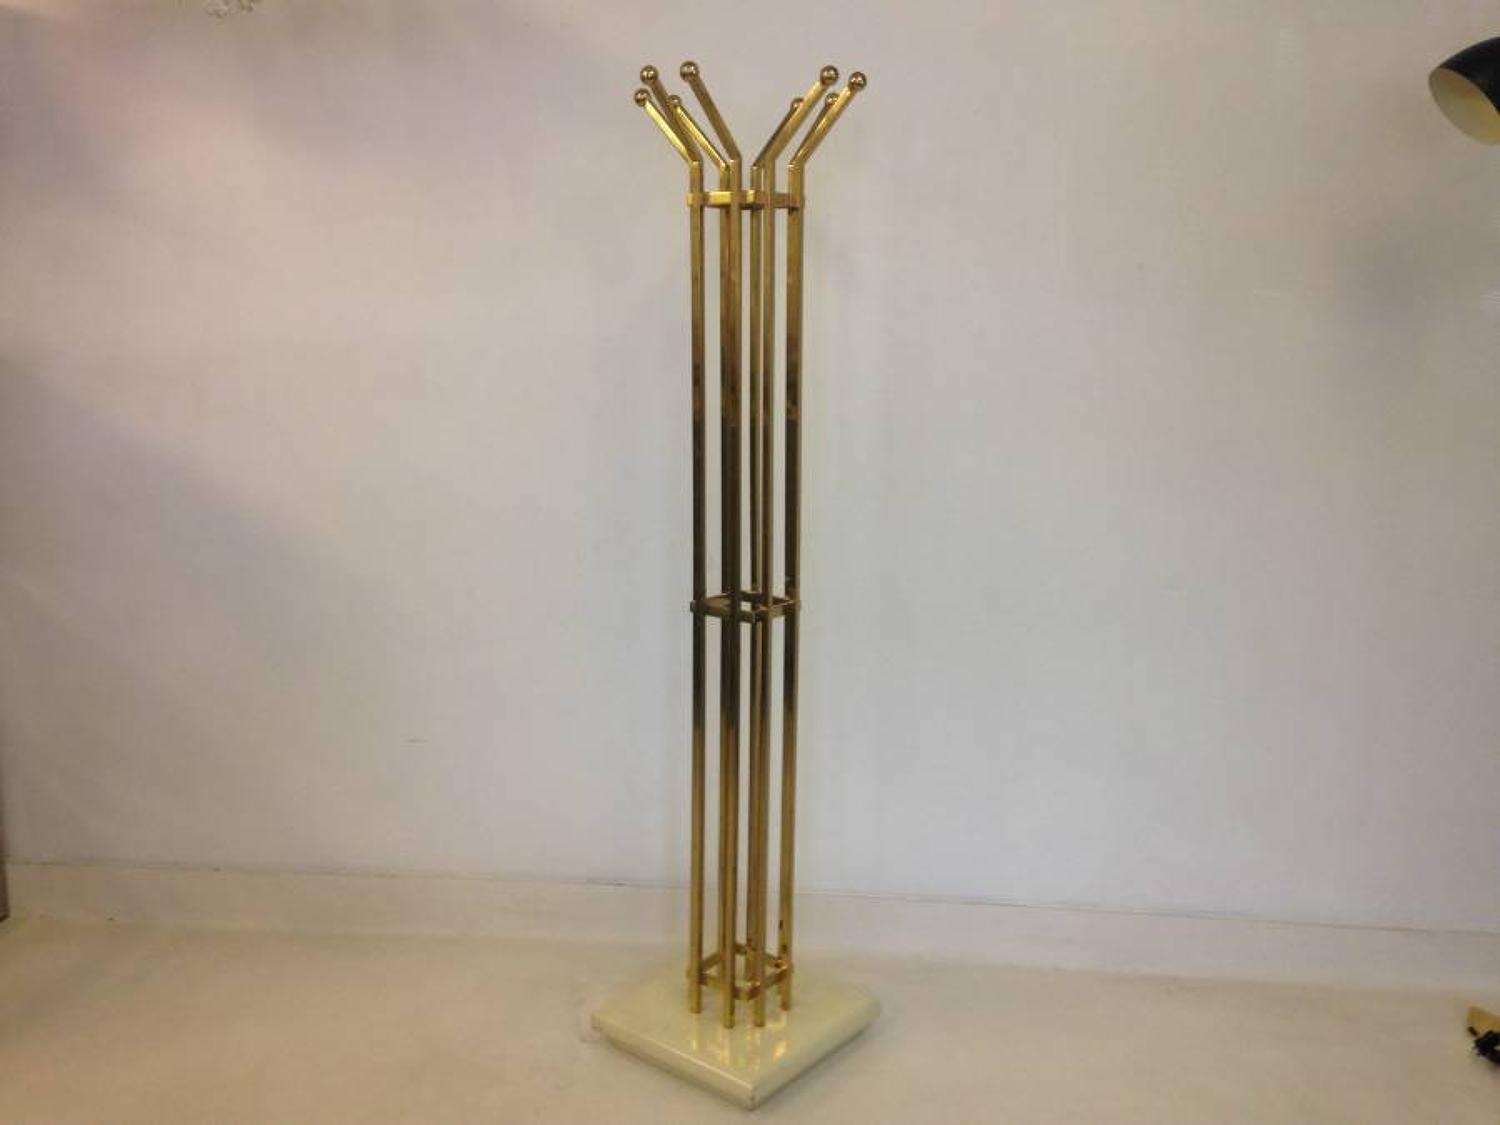 Brass and lacquered wood coatstand by Alain Delon